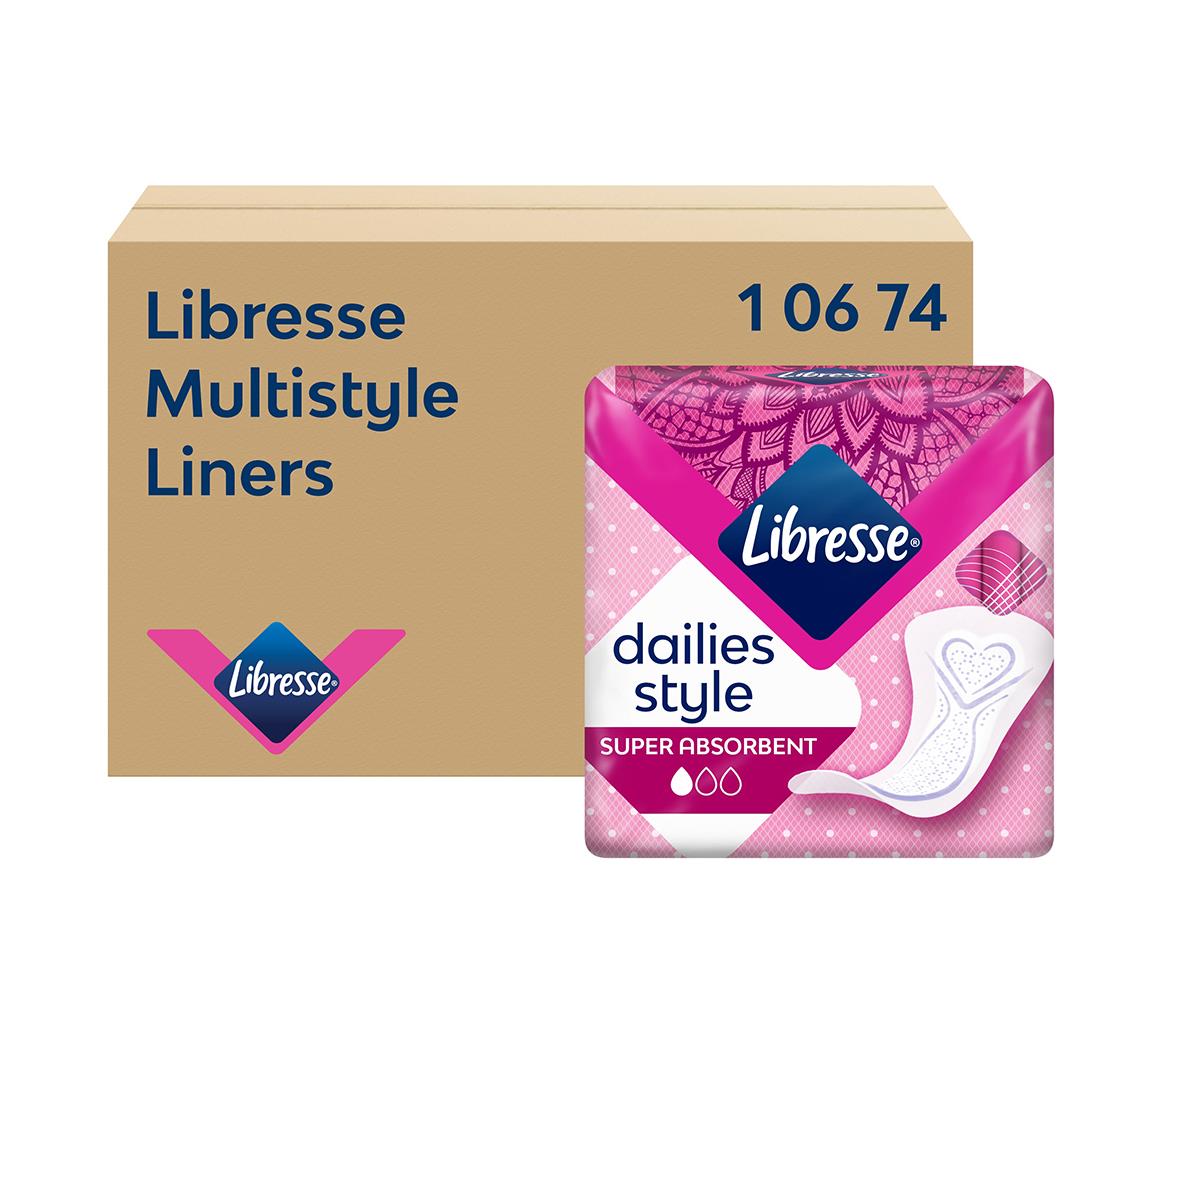 Trosskydd Libresse Multistyle Refill 51021177_1